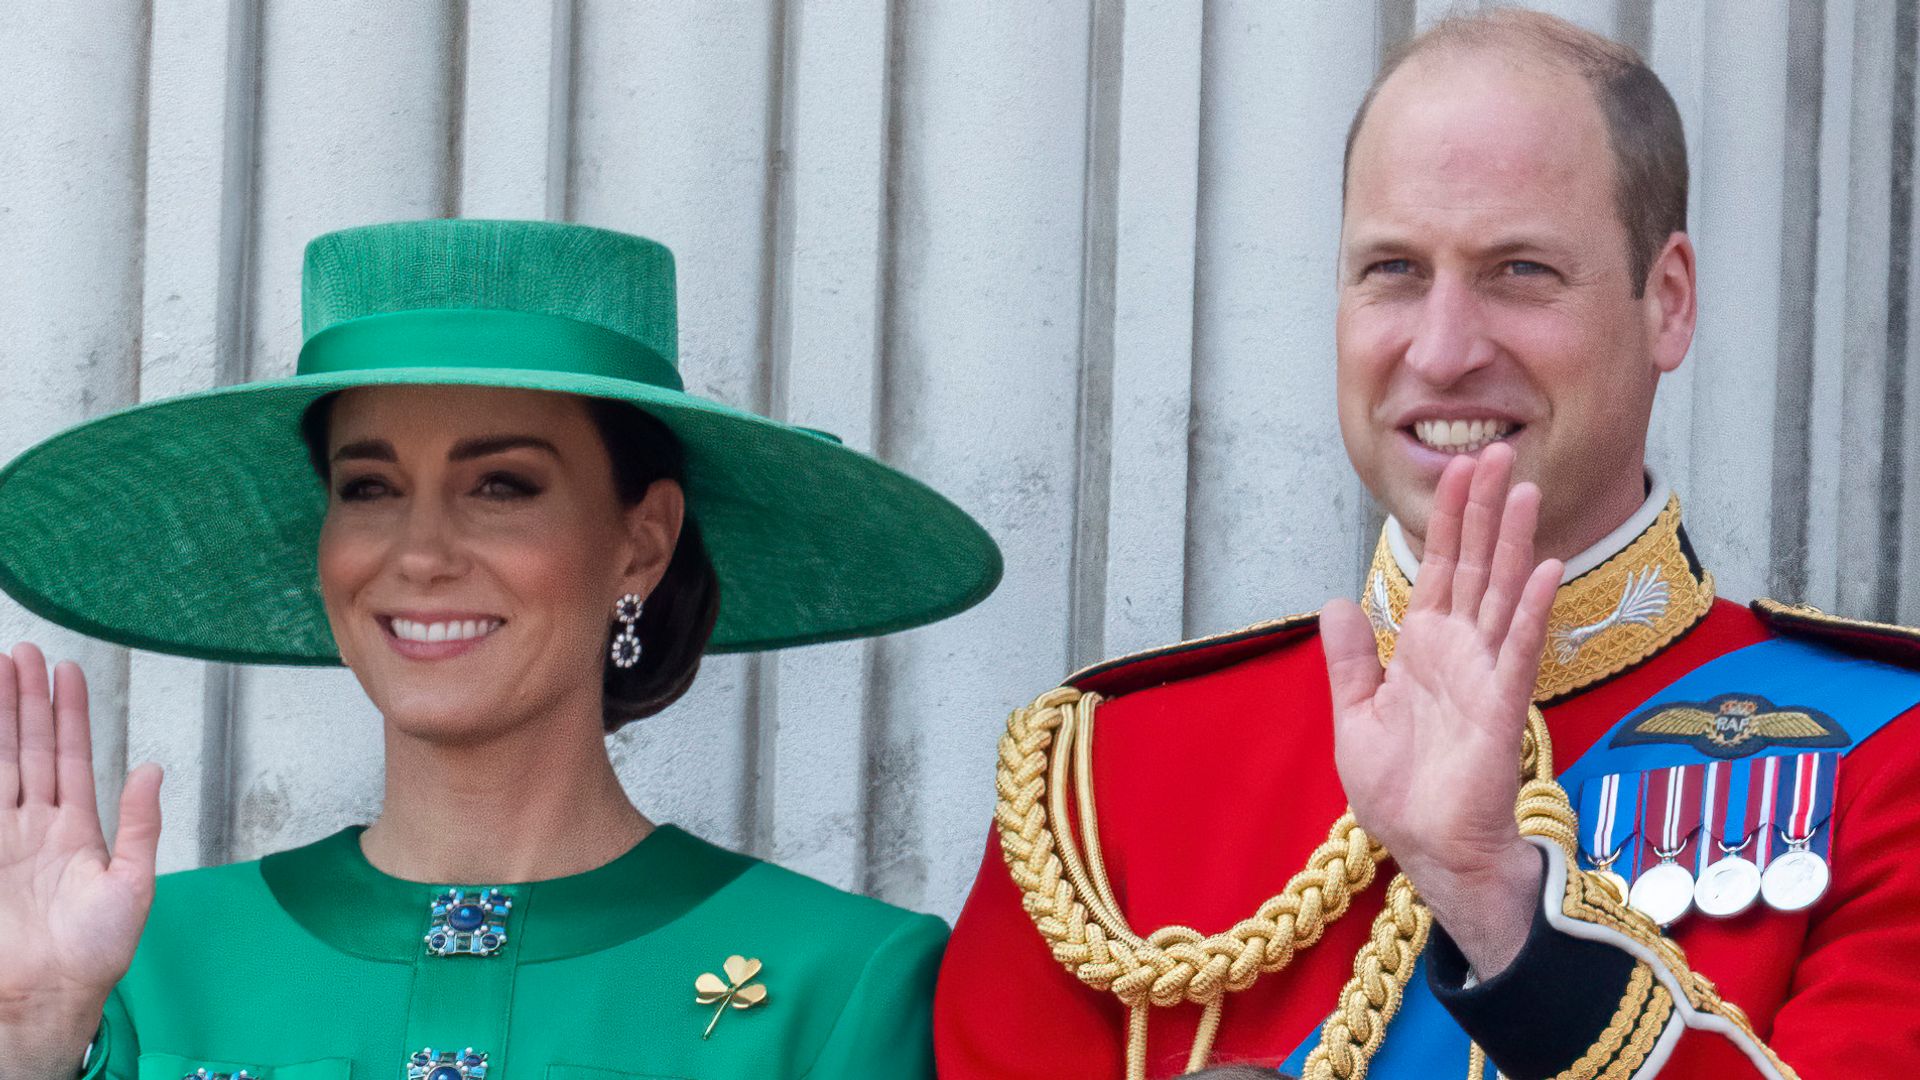 Prince William and Kate Middleton release heartfelt message after